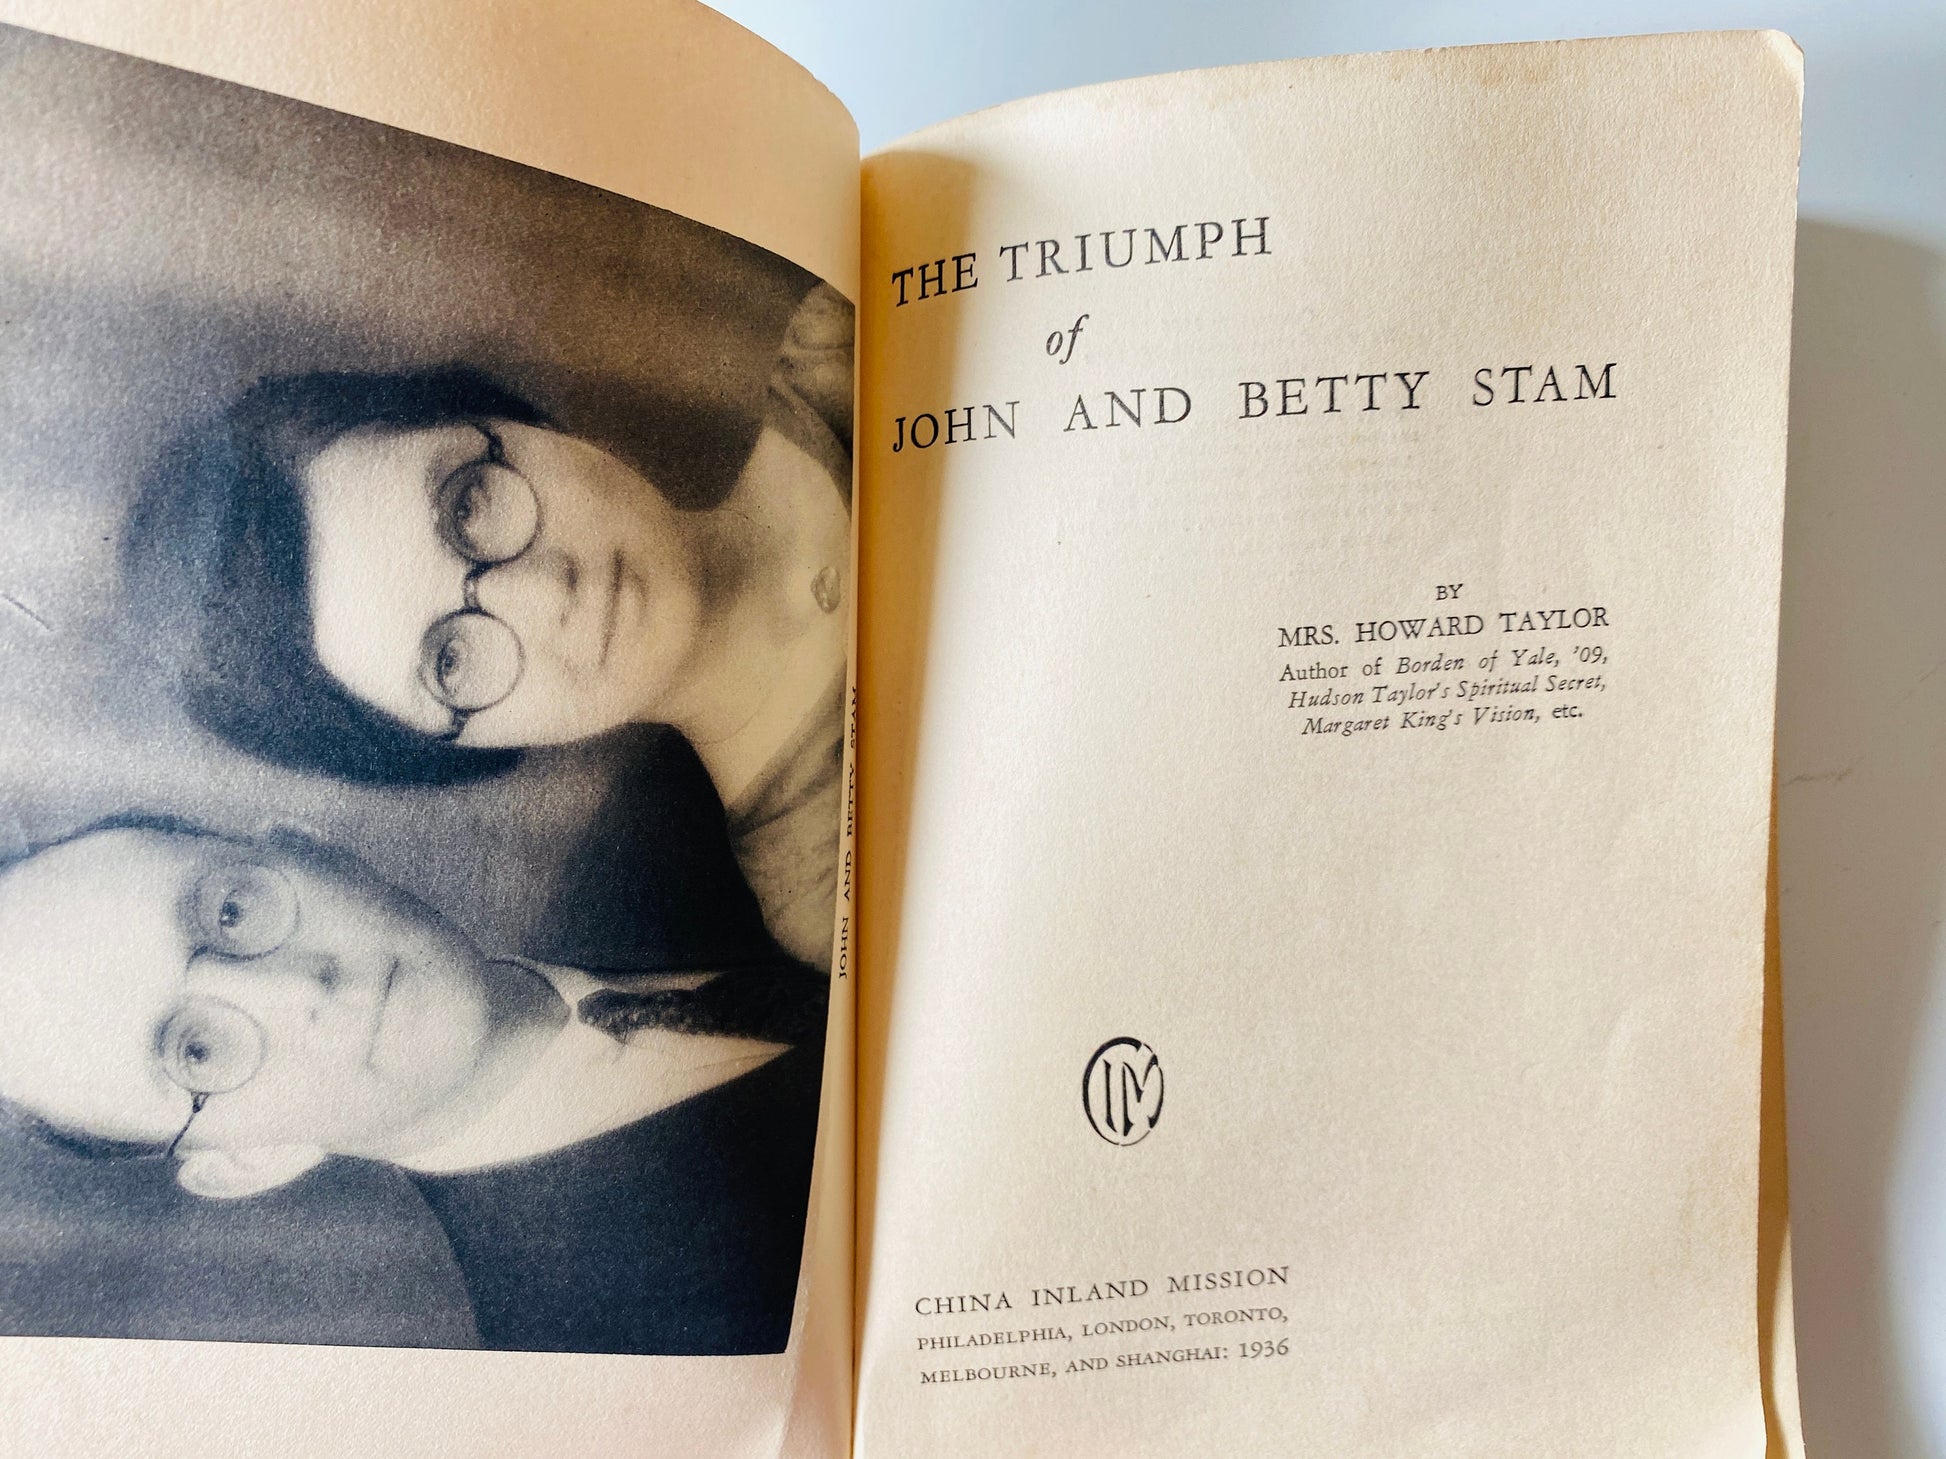 1935 Triumph of John and Betty Stam vintage paperback book about Christianity and God's love by Mrs Howard Taylor